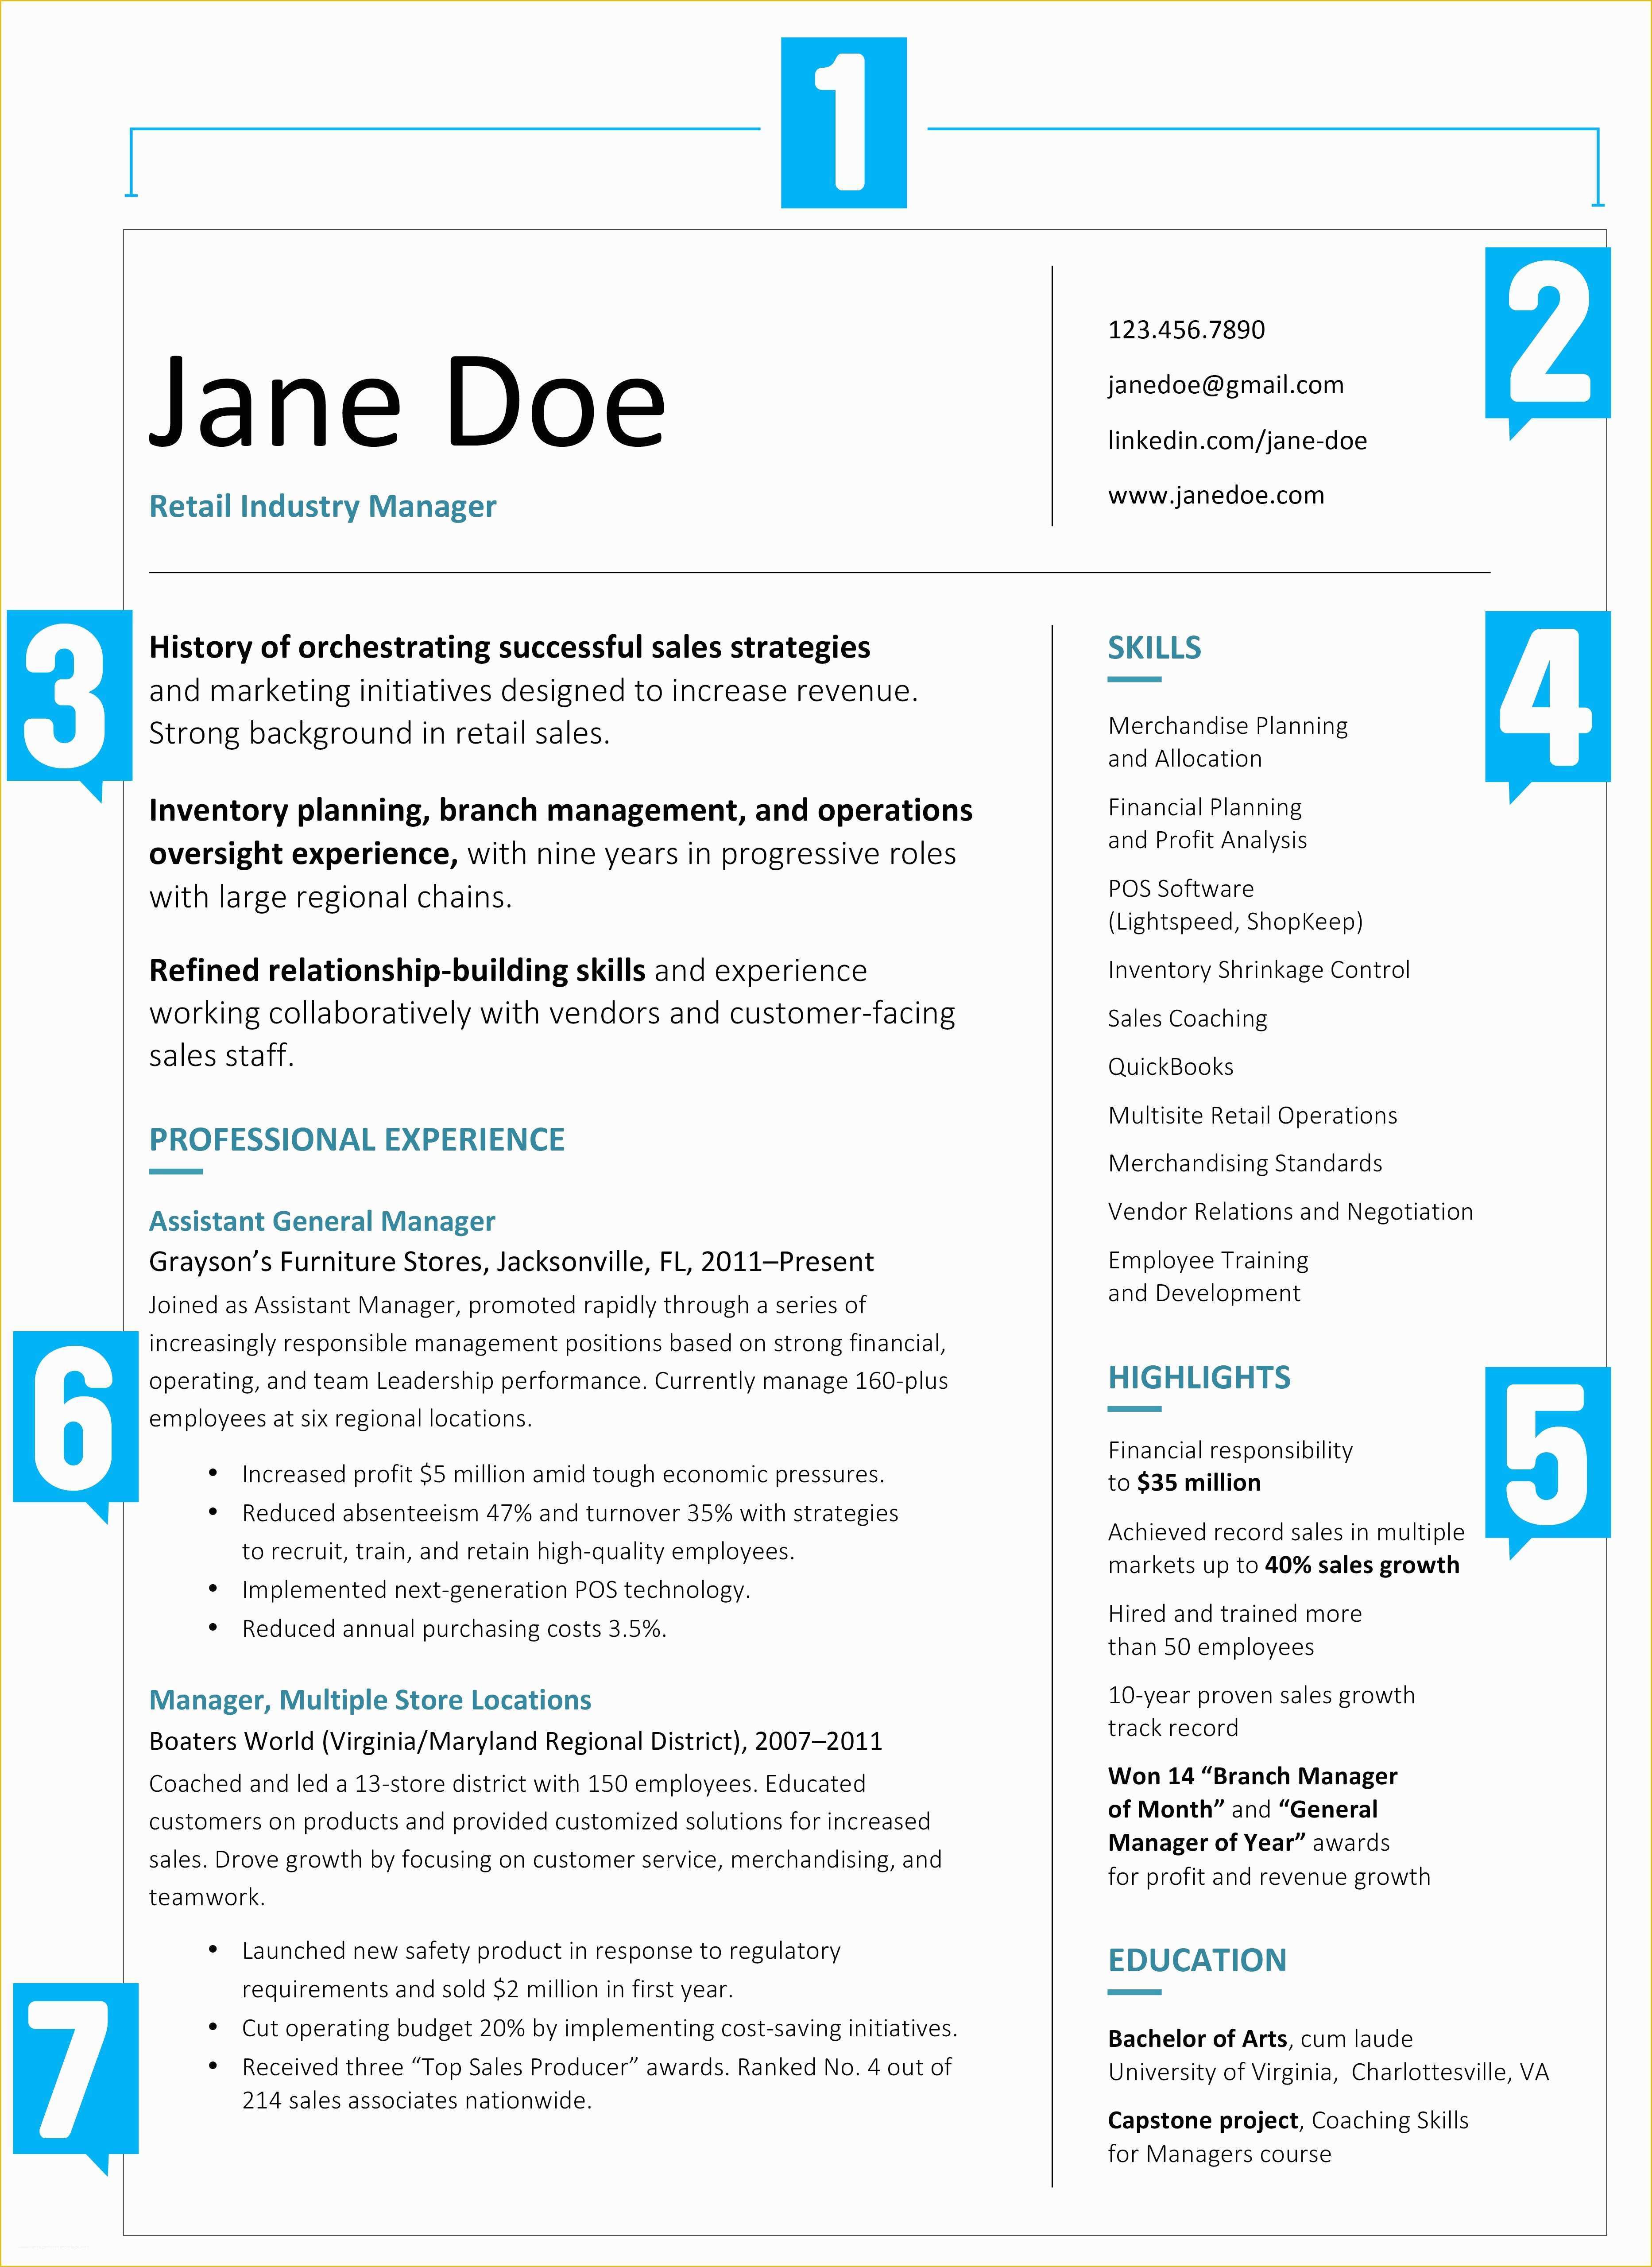 Best Resume Templates 2017 Free Of What Your Resume Should Look Like In 2017